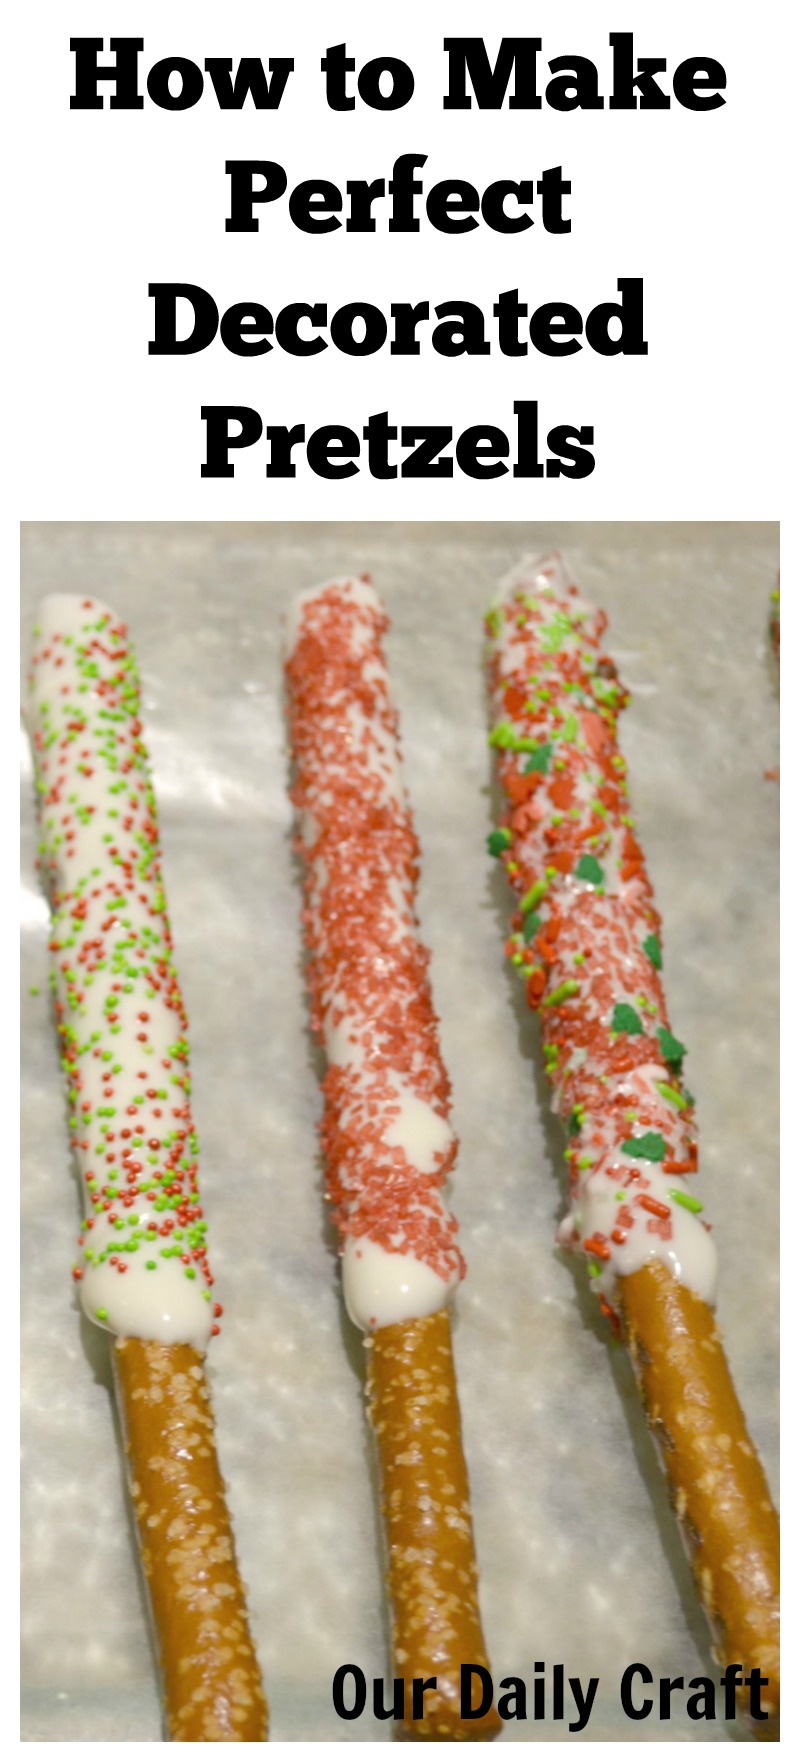 How to make the best decorated pretzels for gifts and holiday parties.